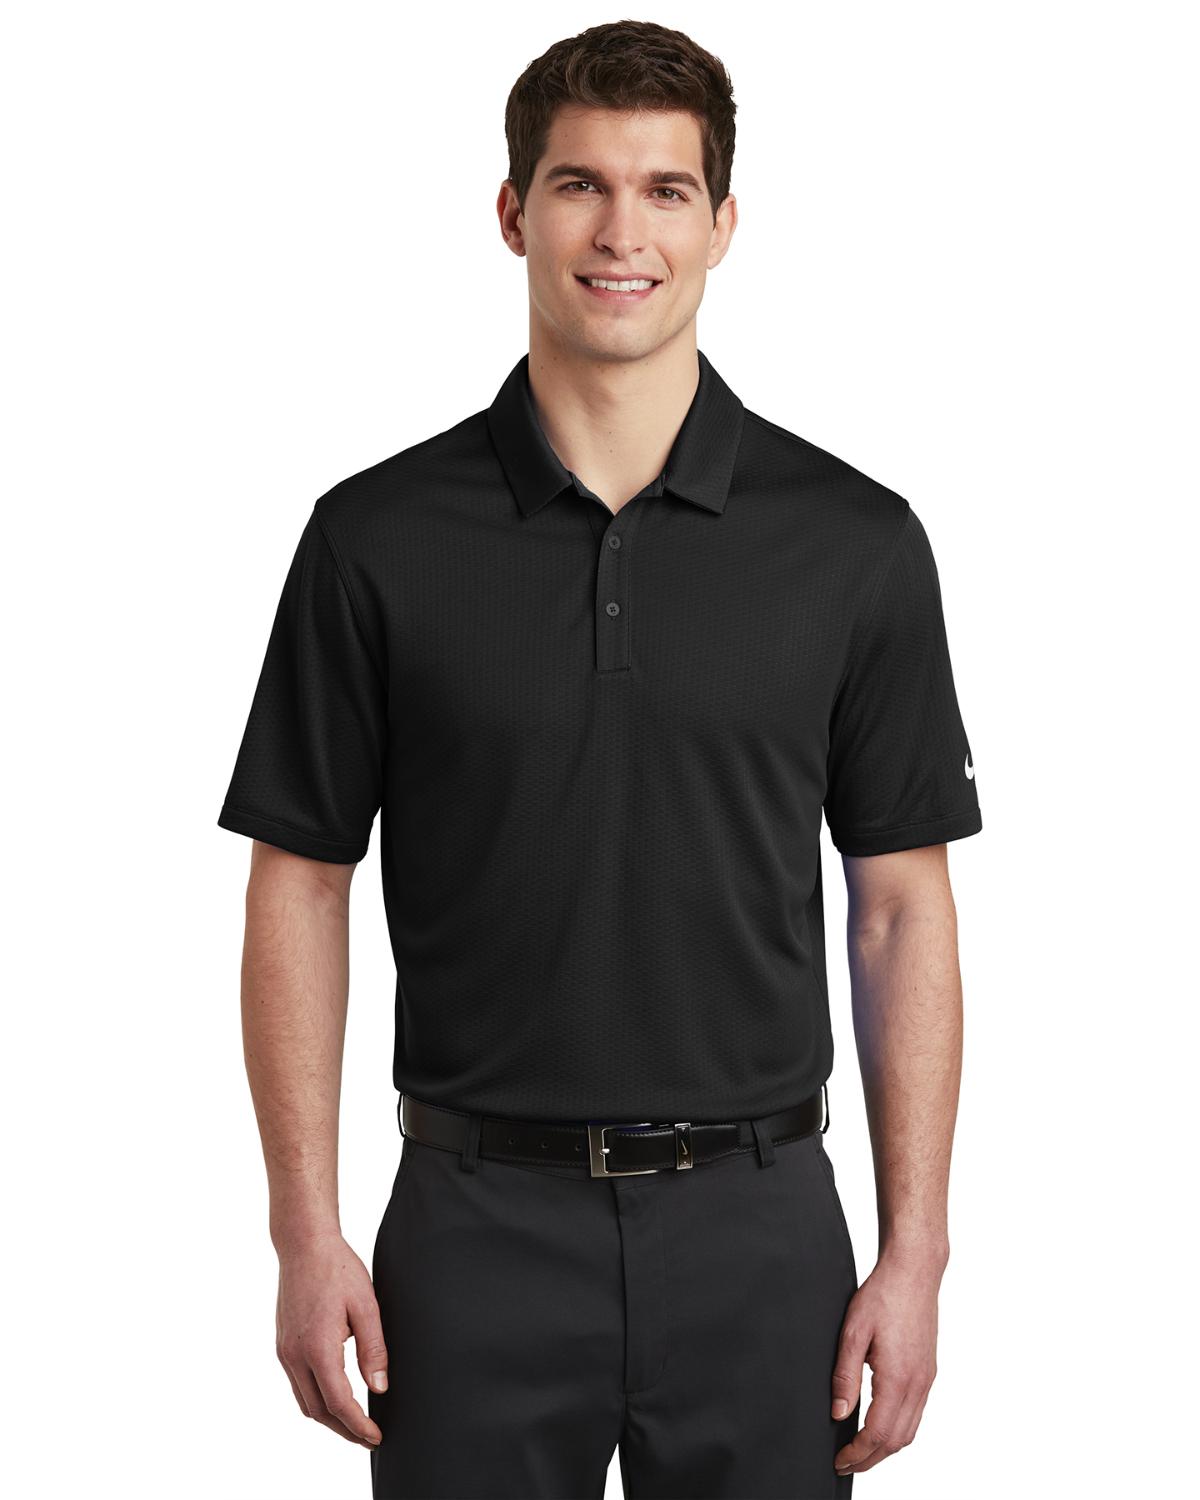 Size Chart for Nike Golf NKAH6266 Dri-FIT Hex Textured Polo ...